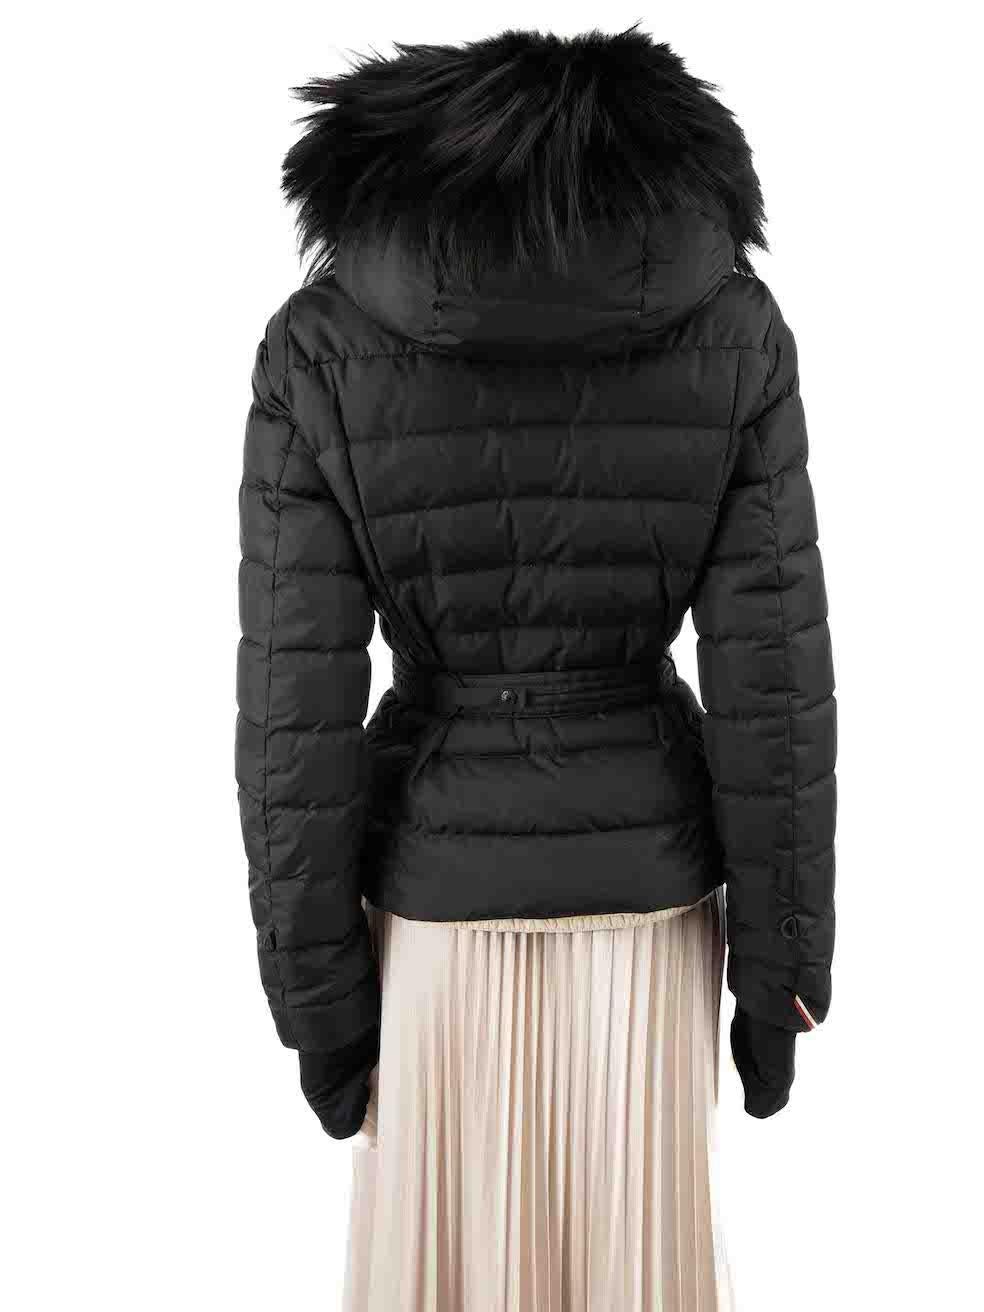 Moncler Moncler Grenoble Black Beverley Technical Down Jacket Size M In Good Condition For Sale In London, GB